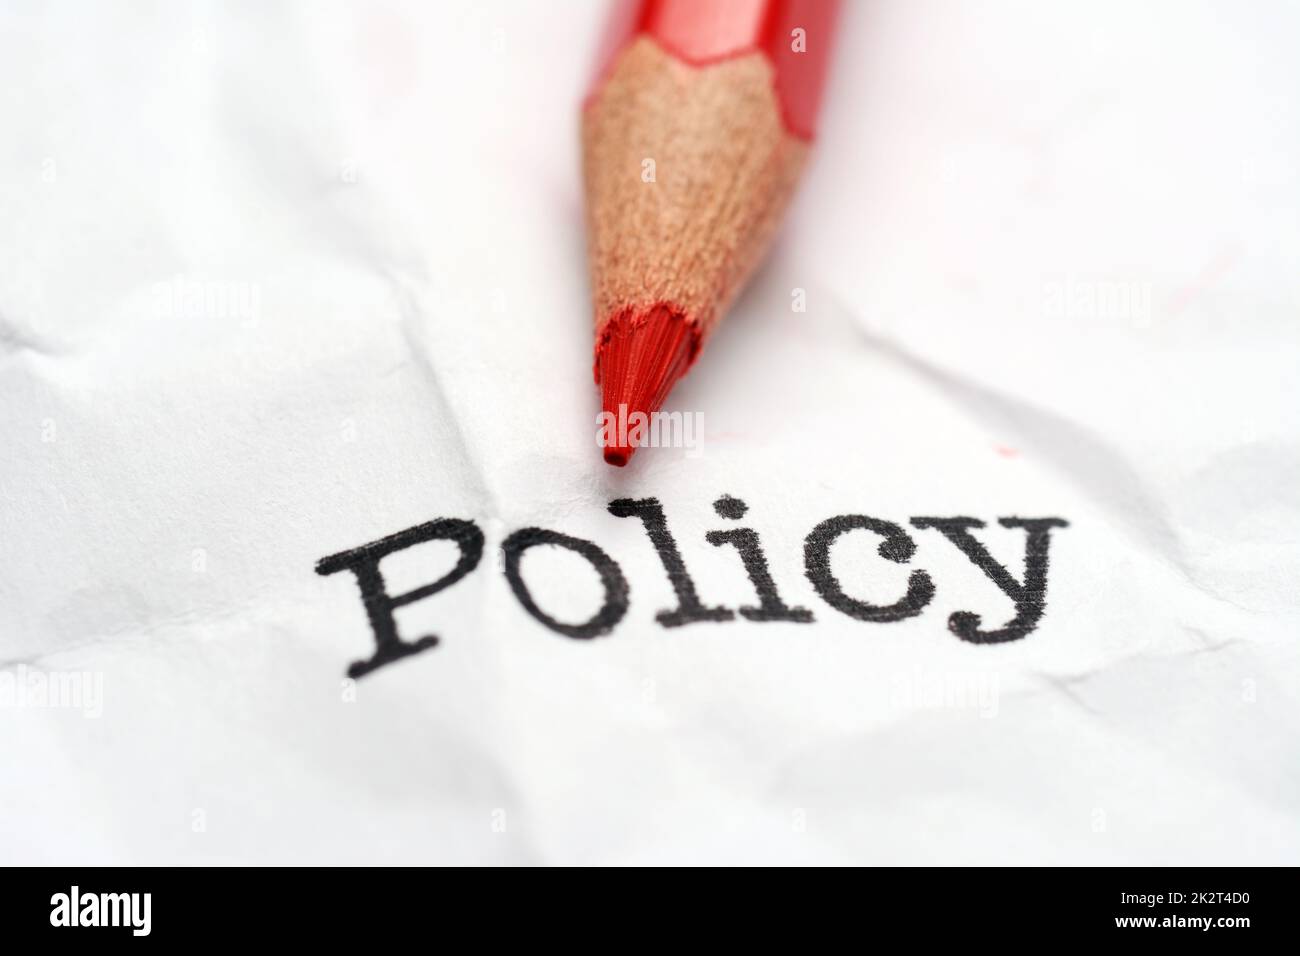 Pencil on policy text Stock Photo